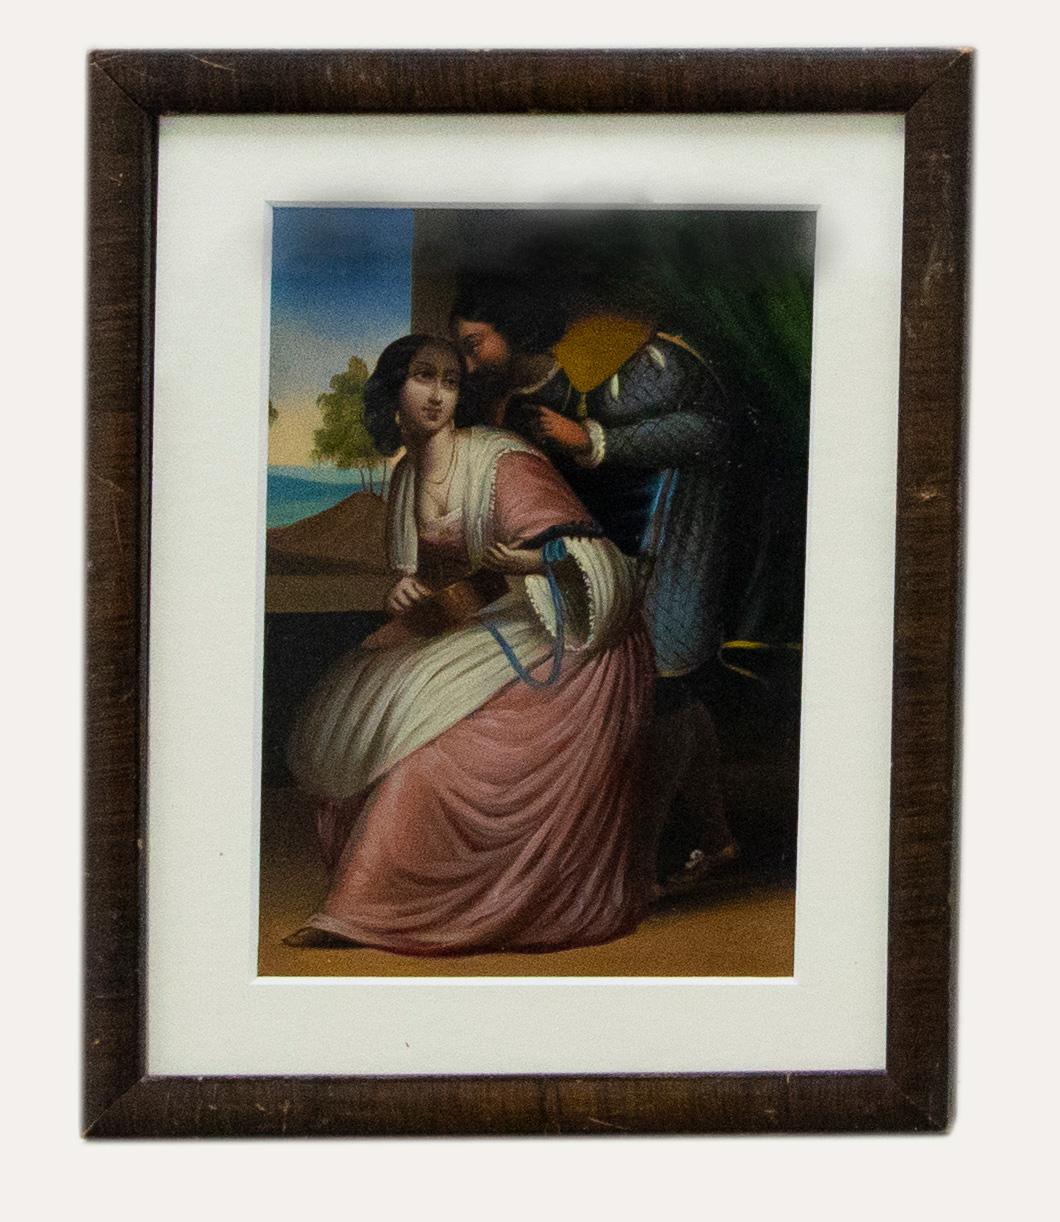 Unknown Figurative Painting - Spanish School   19th Century Oil - A Musical Romance